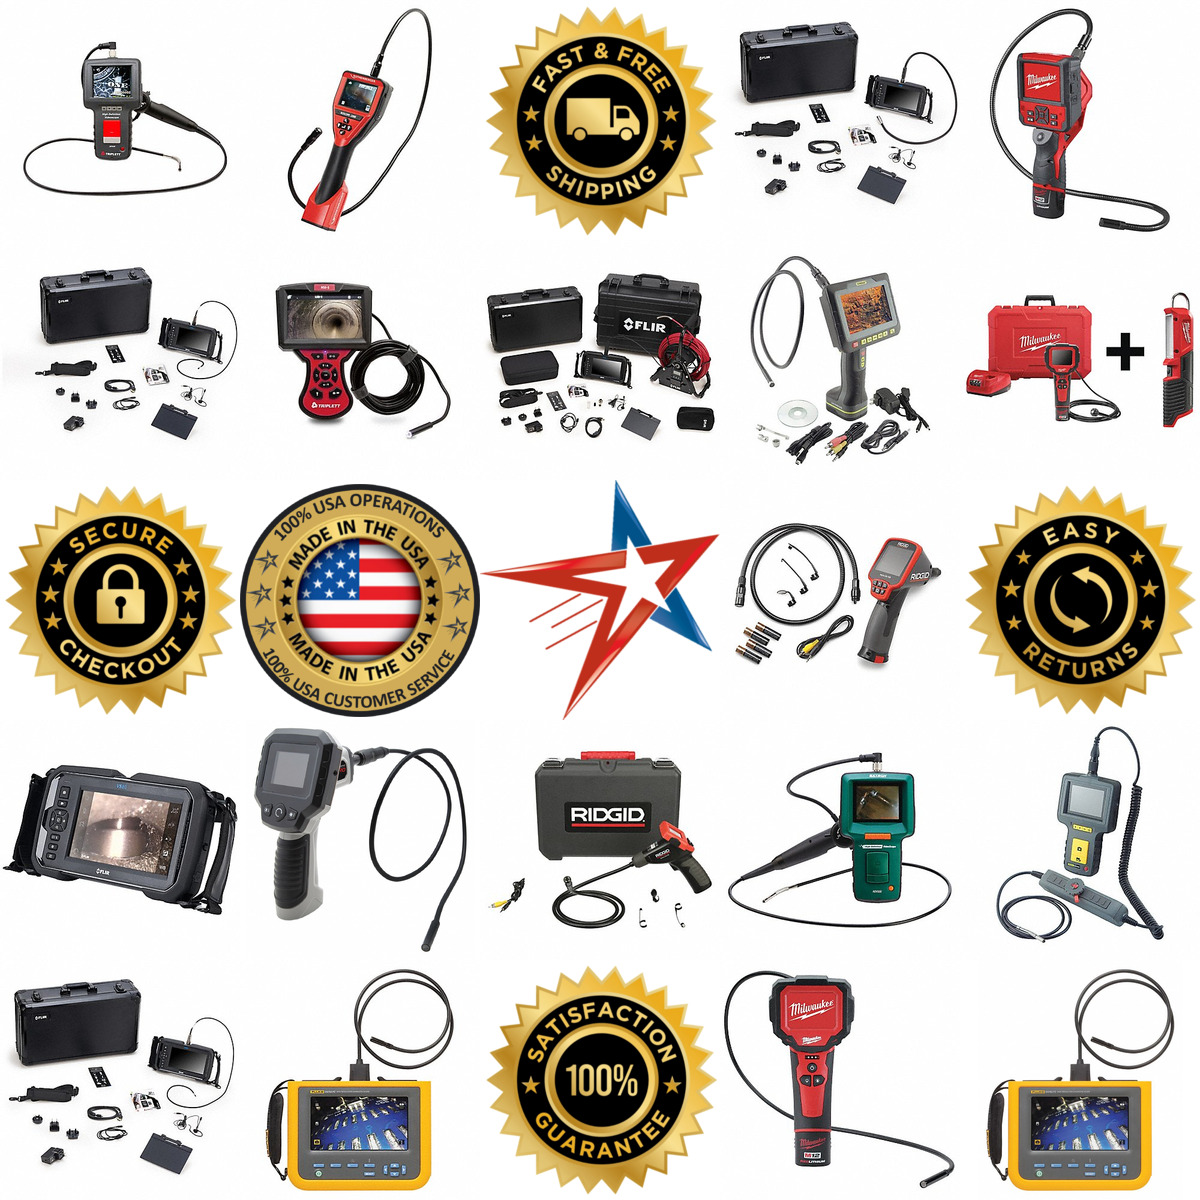 A selection of Borescopes products on GoVets